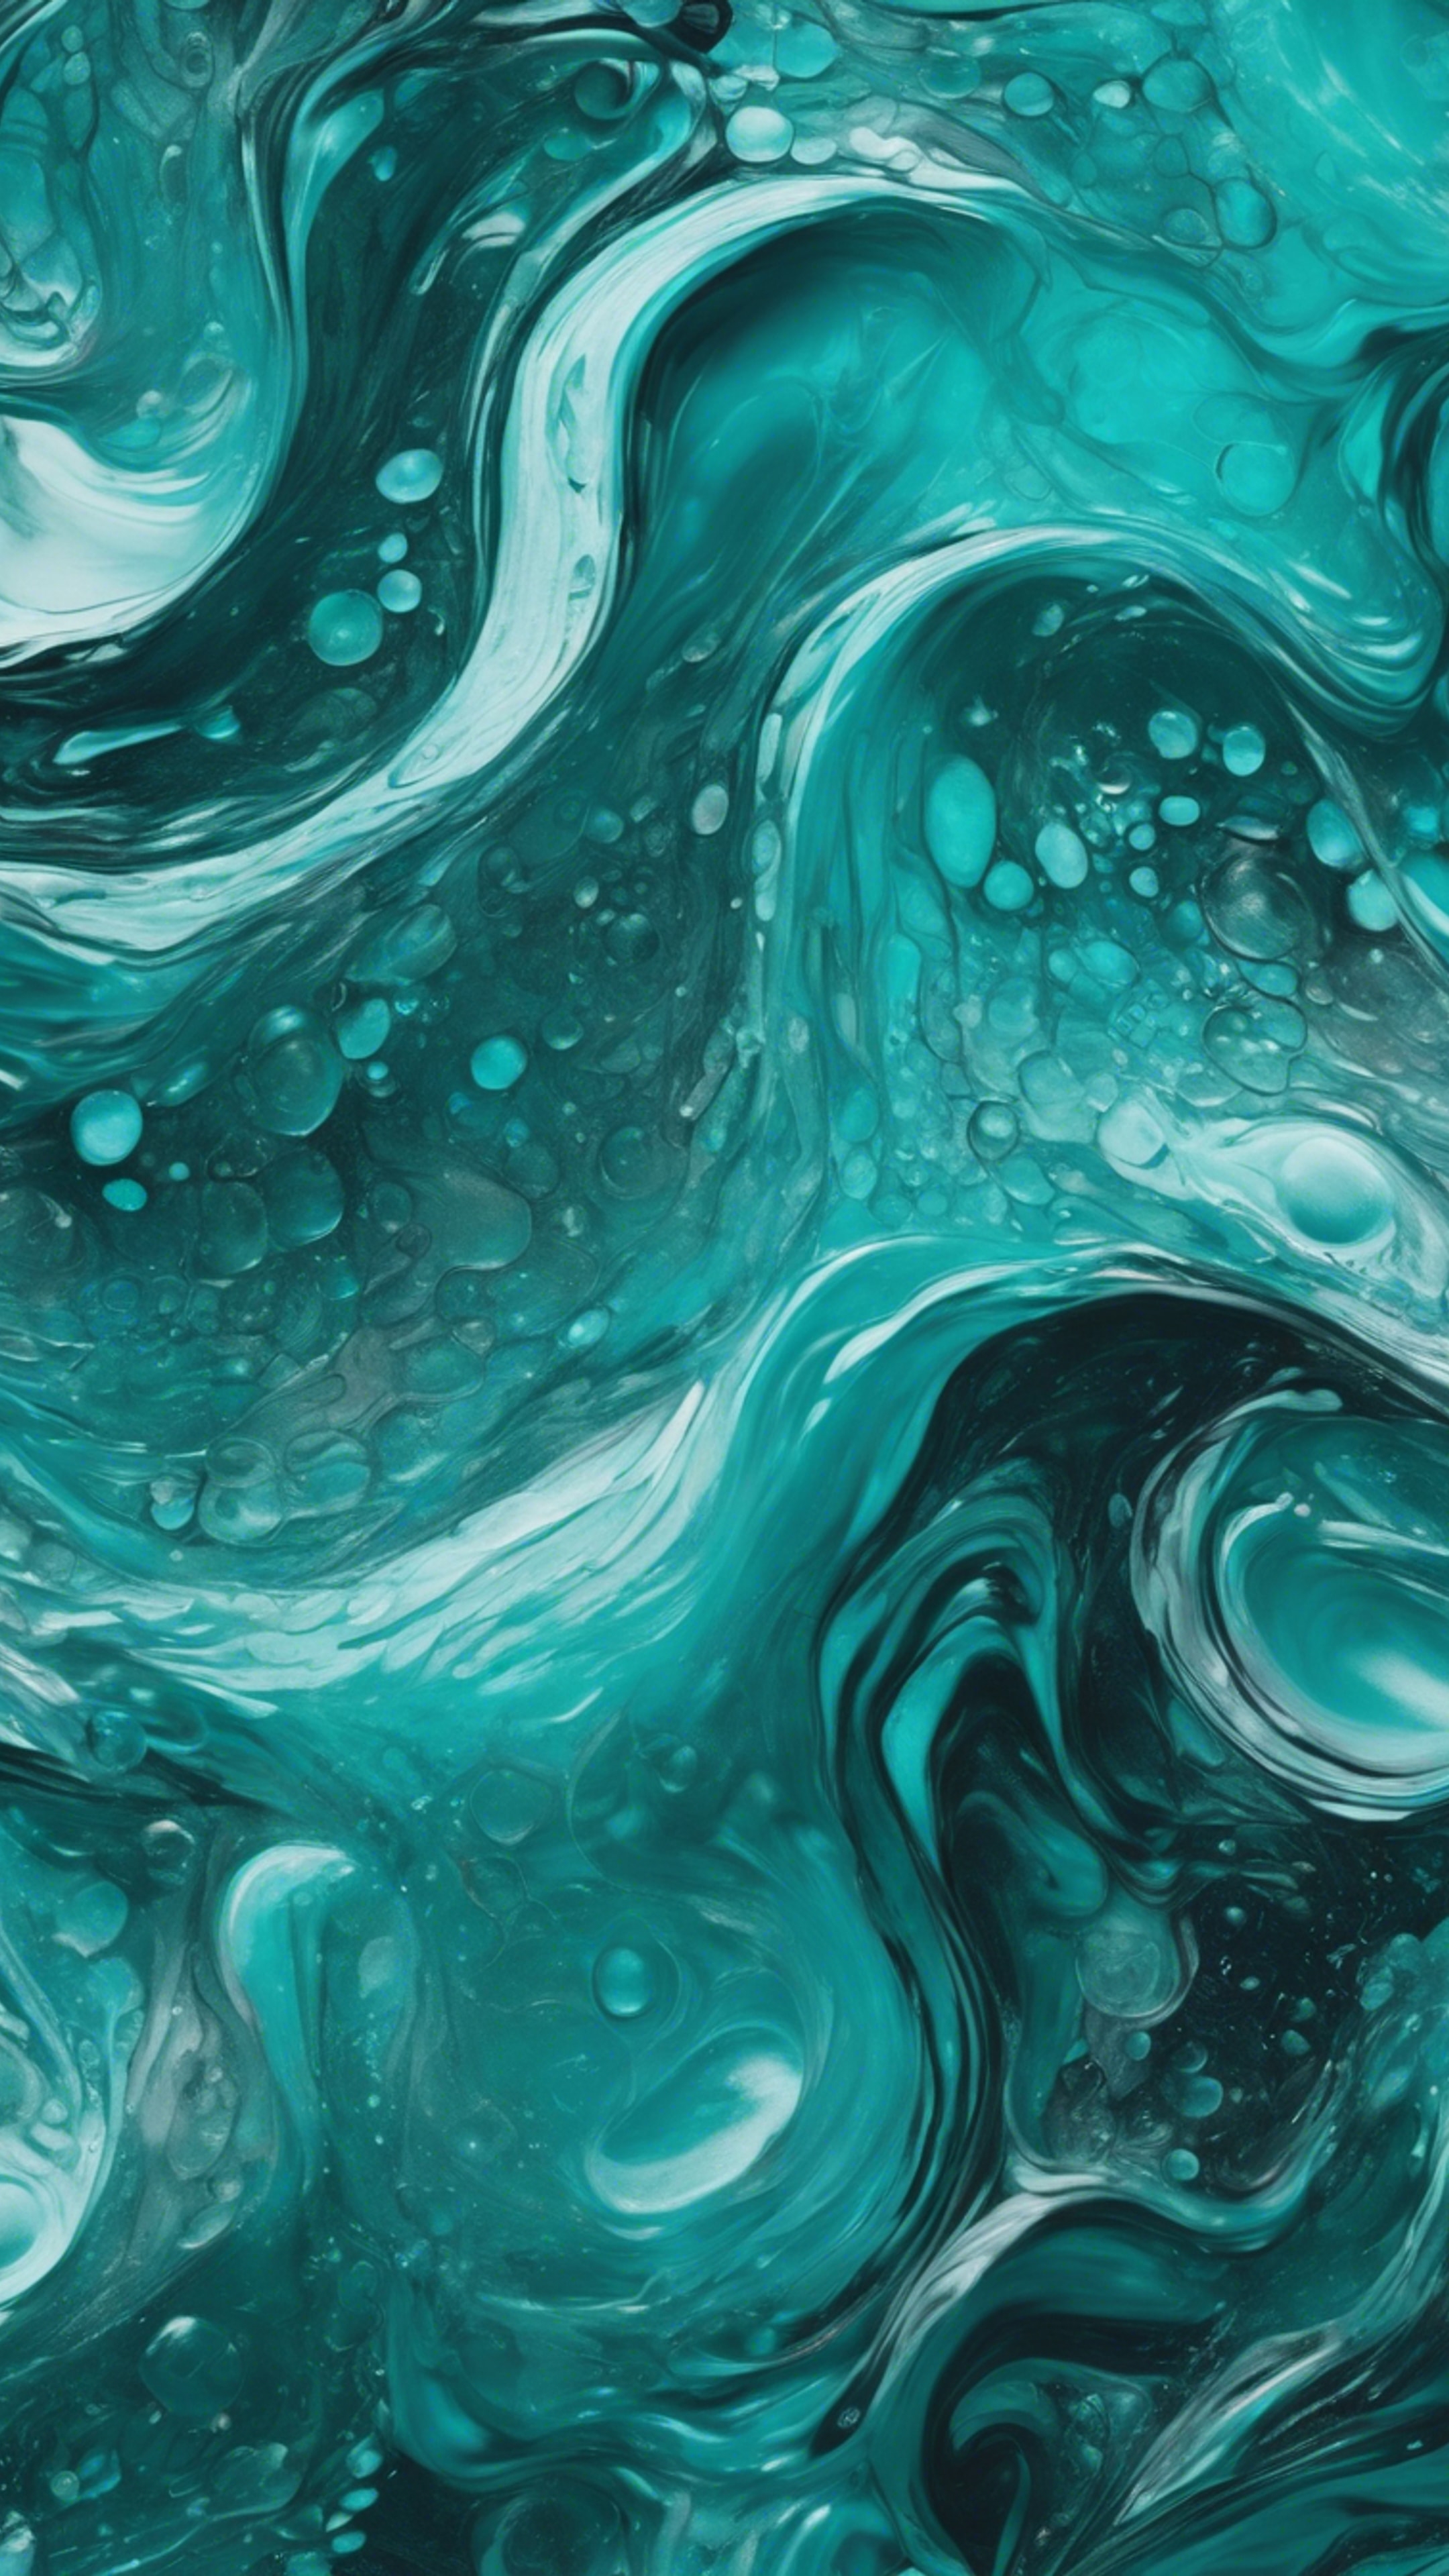 Abstract painting with swirling waves of shades of cool teal. Tapeet[053c1b1ade8044ef8a45]